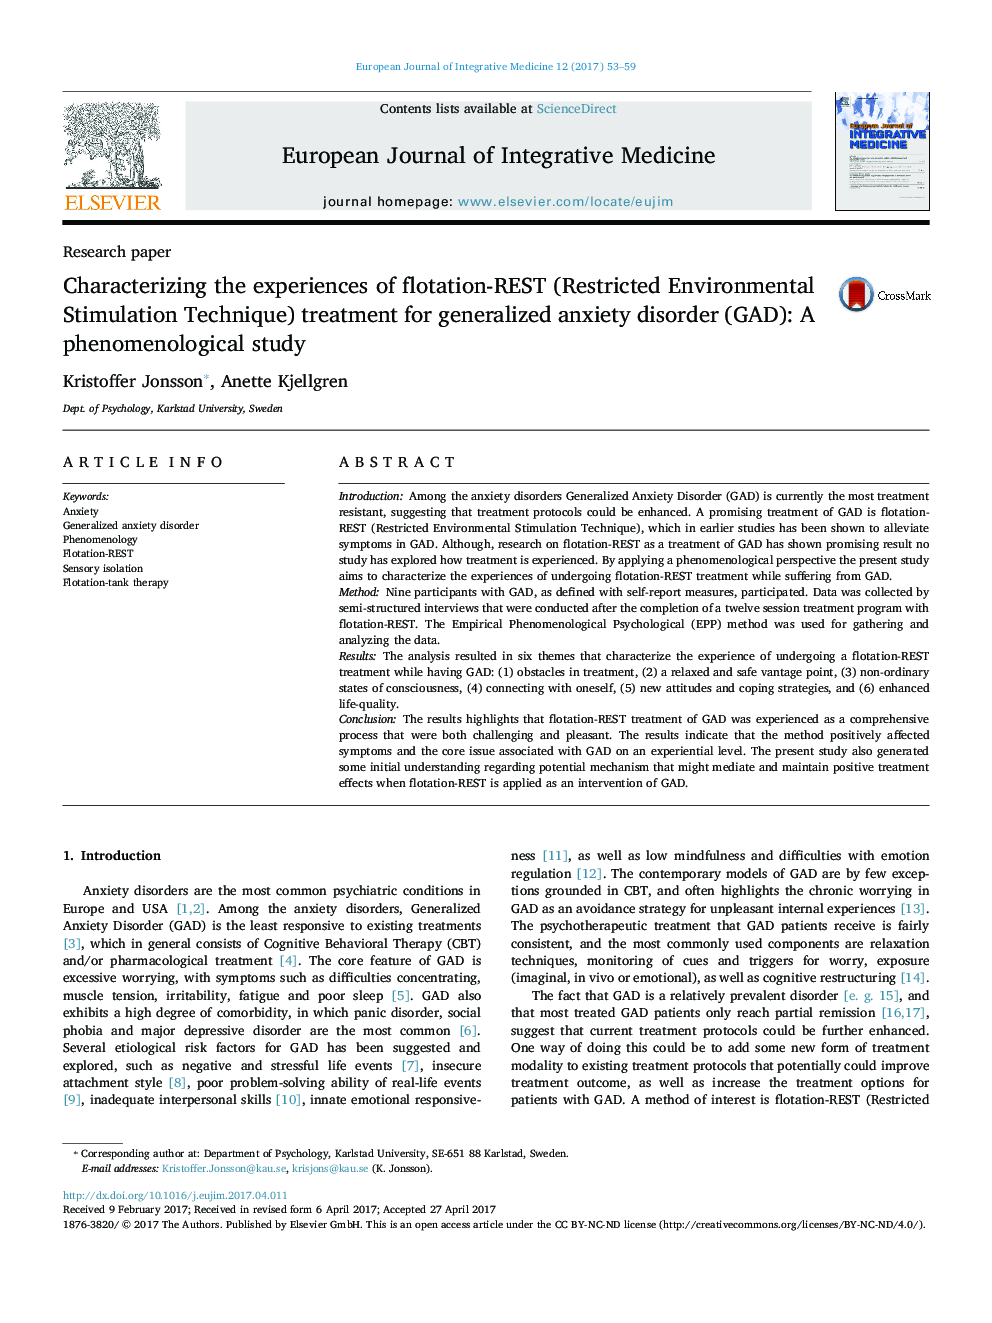 Characterizing the experiences of flotation-REST (Restricted Environmental Stimulation Technique) treatment for generalized anxiety disorder (GAD): A phenomenological study